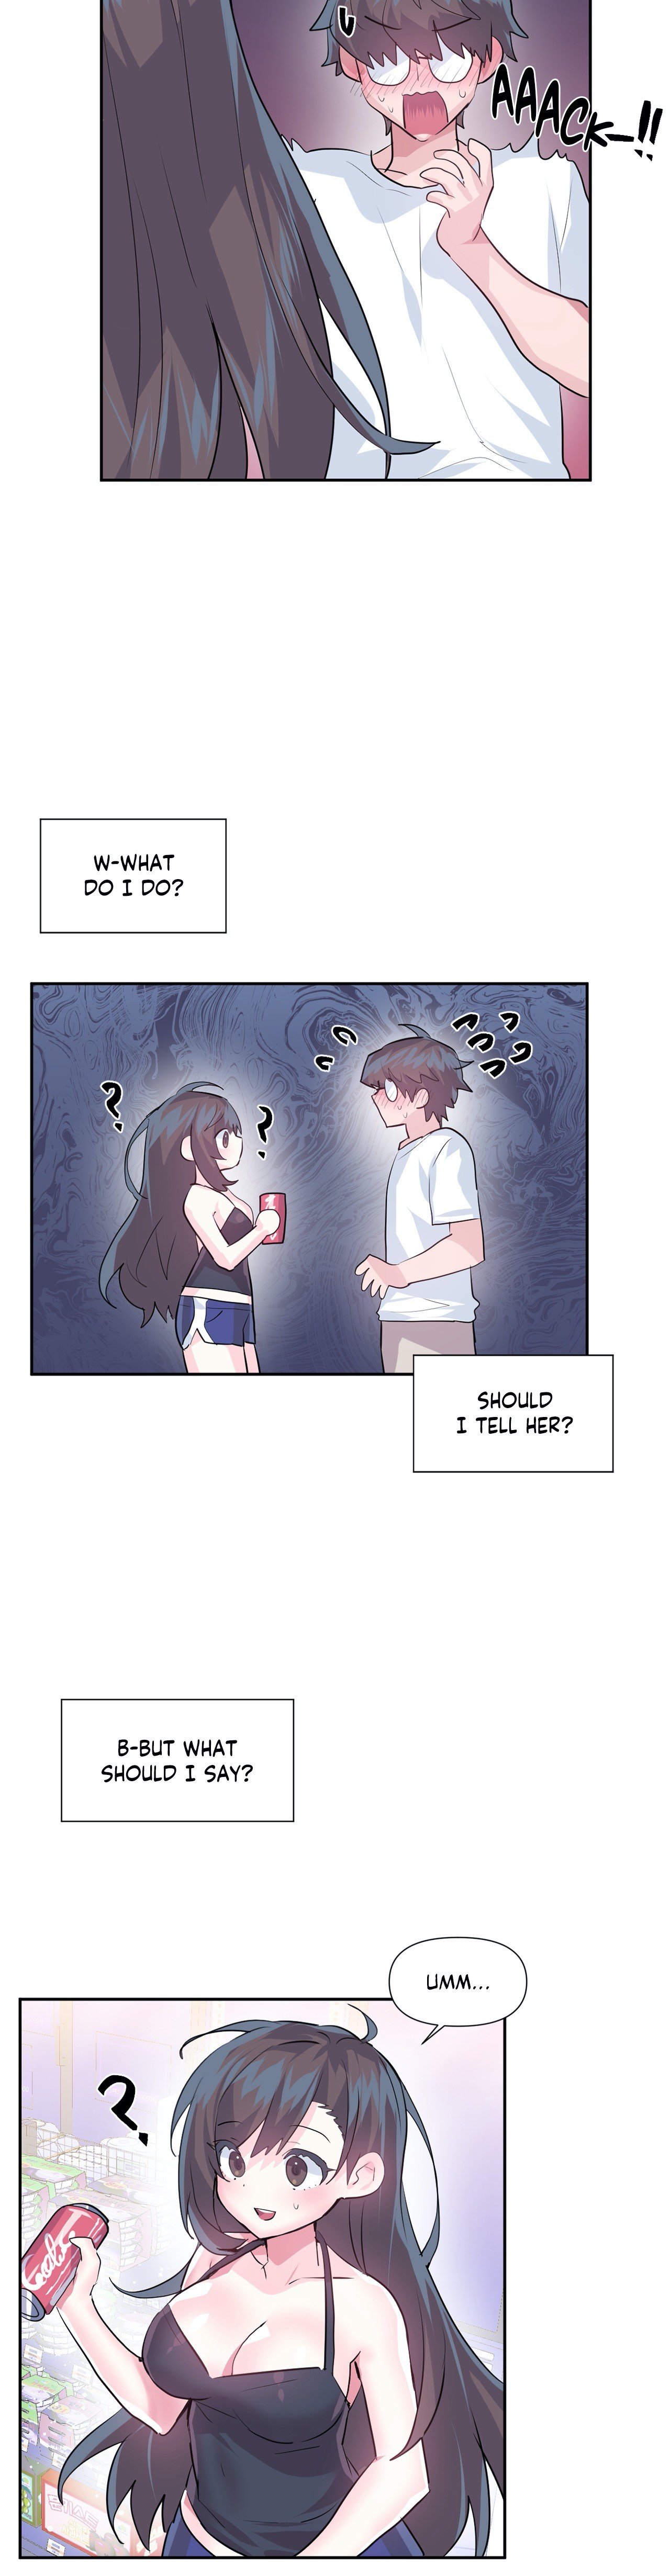 log-in-to-lust-a-land-chap-33-11